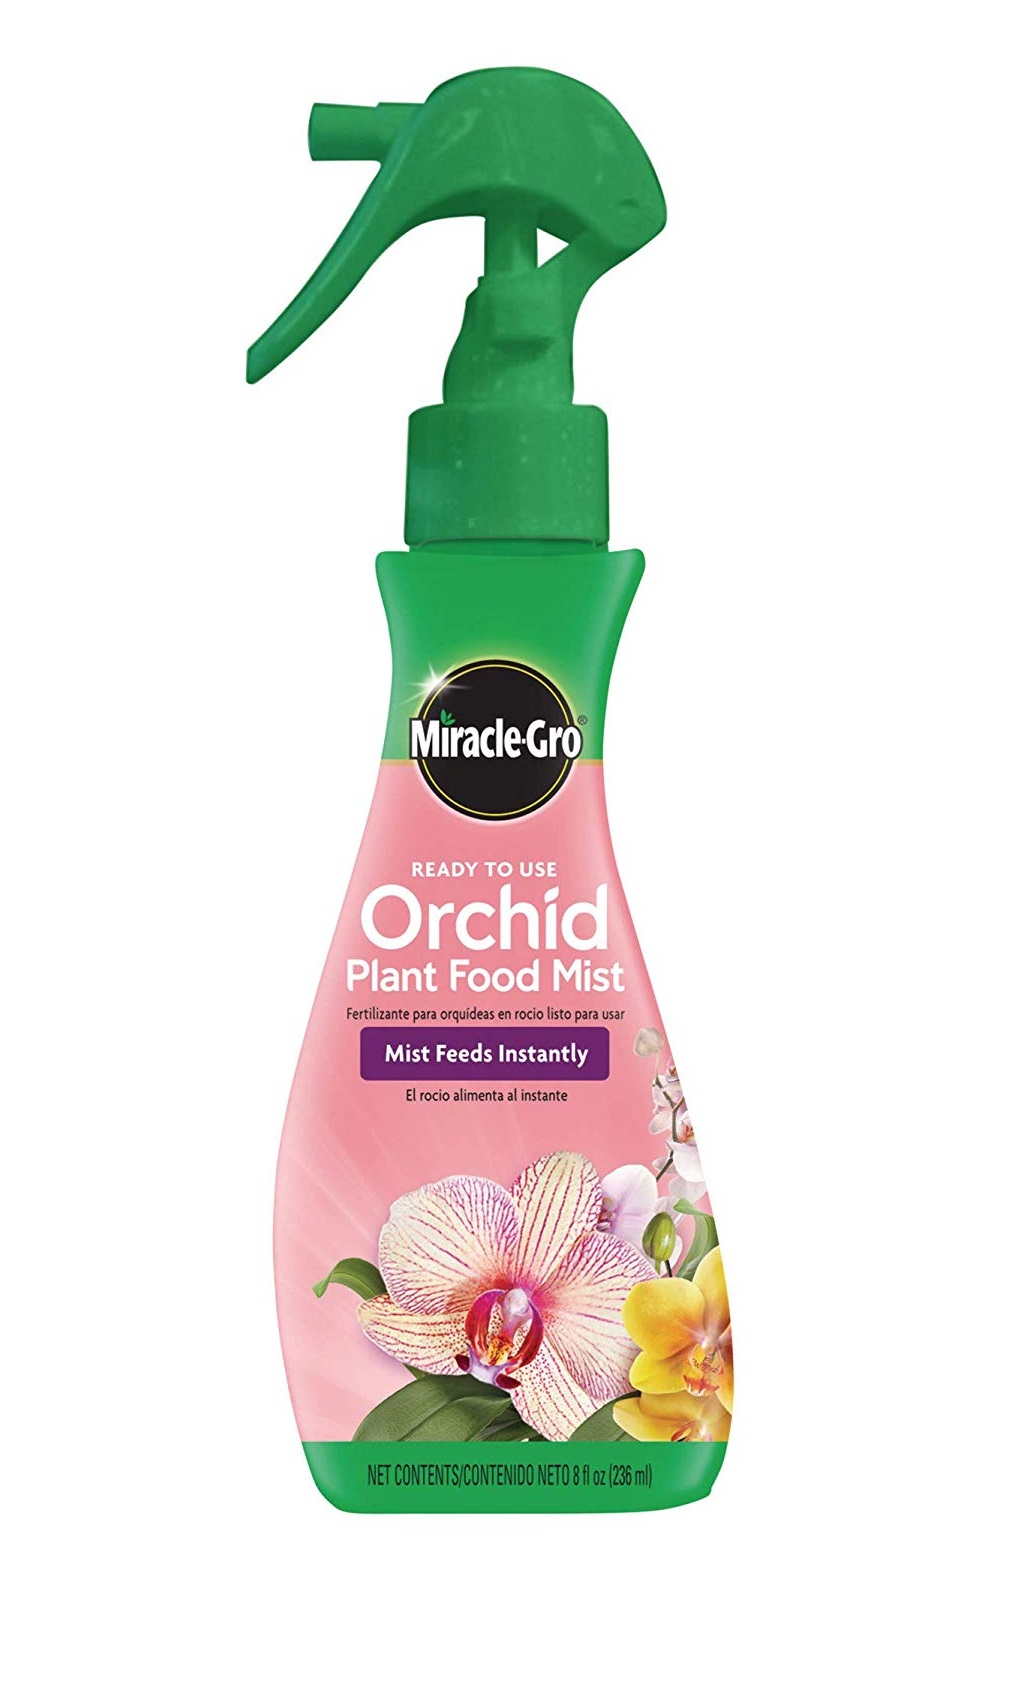 Miracle Gro Miracle-Gro 100195 Ready to Use Orchid Plant Food Mist, 8 Oz